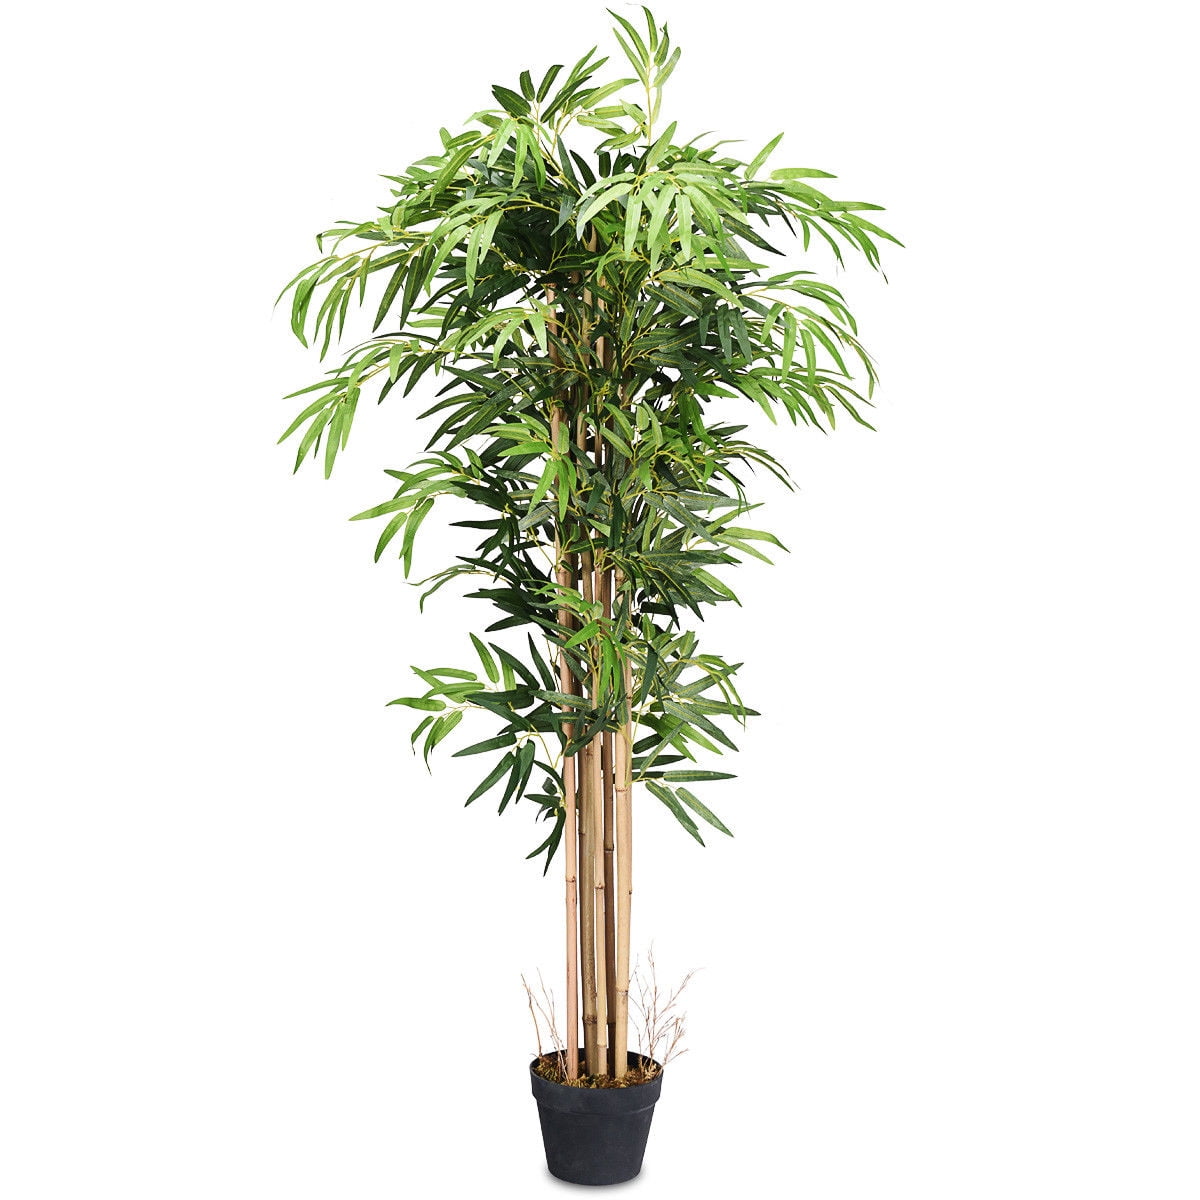 5.5ft Large Artificial Ficus Silk Tree Fake Plant Potted Indoor Outdoor Decor US 